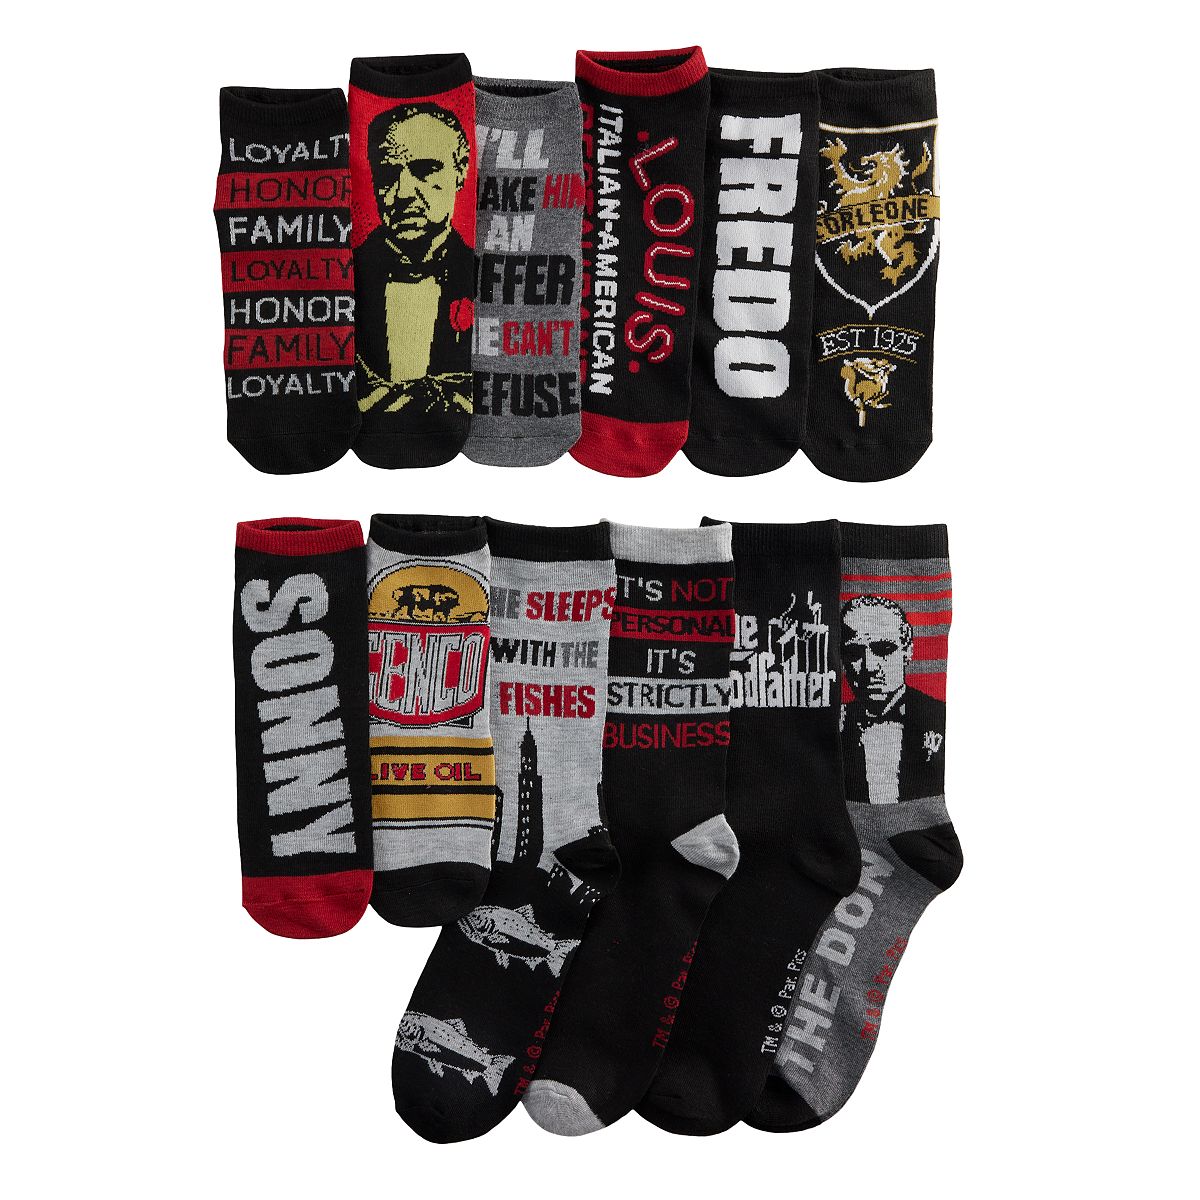 12-Pair Men's Advent 12 Days of Socks (The Godfather, Ted Lasso or Seinfeld) $2.12 + Free Shipping on $49+